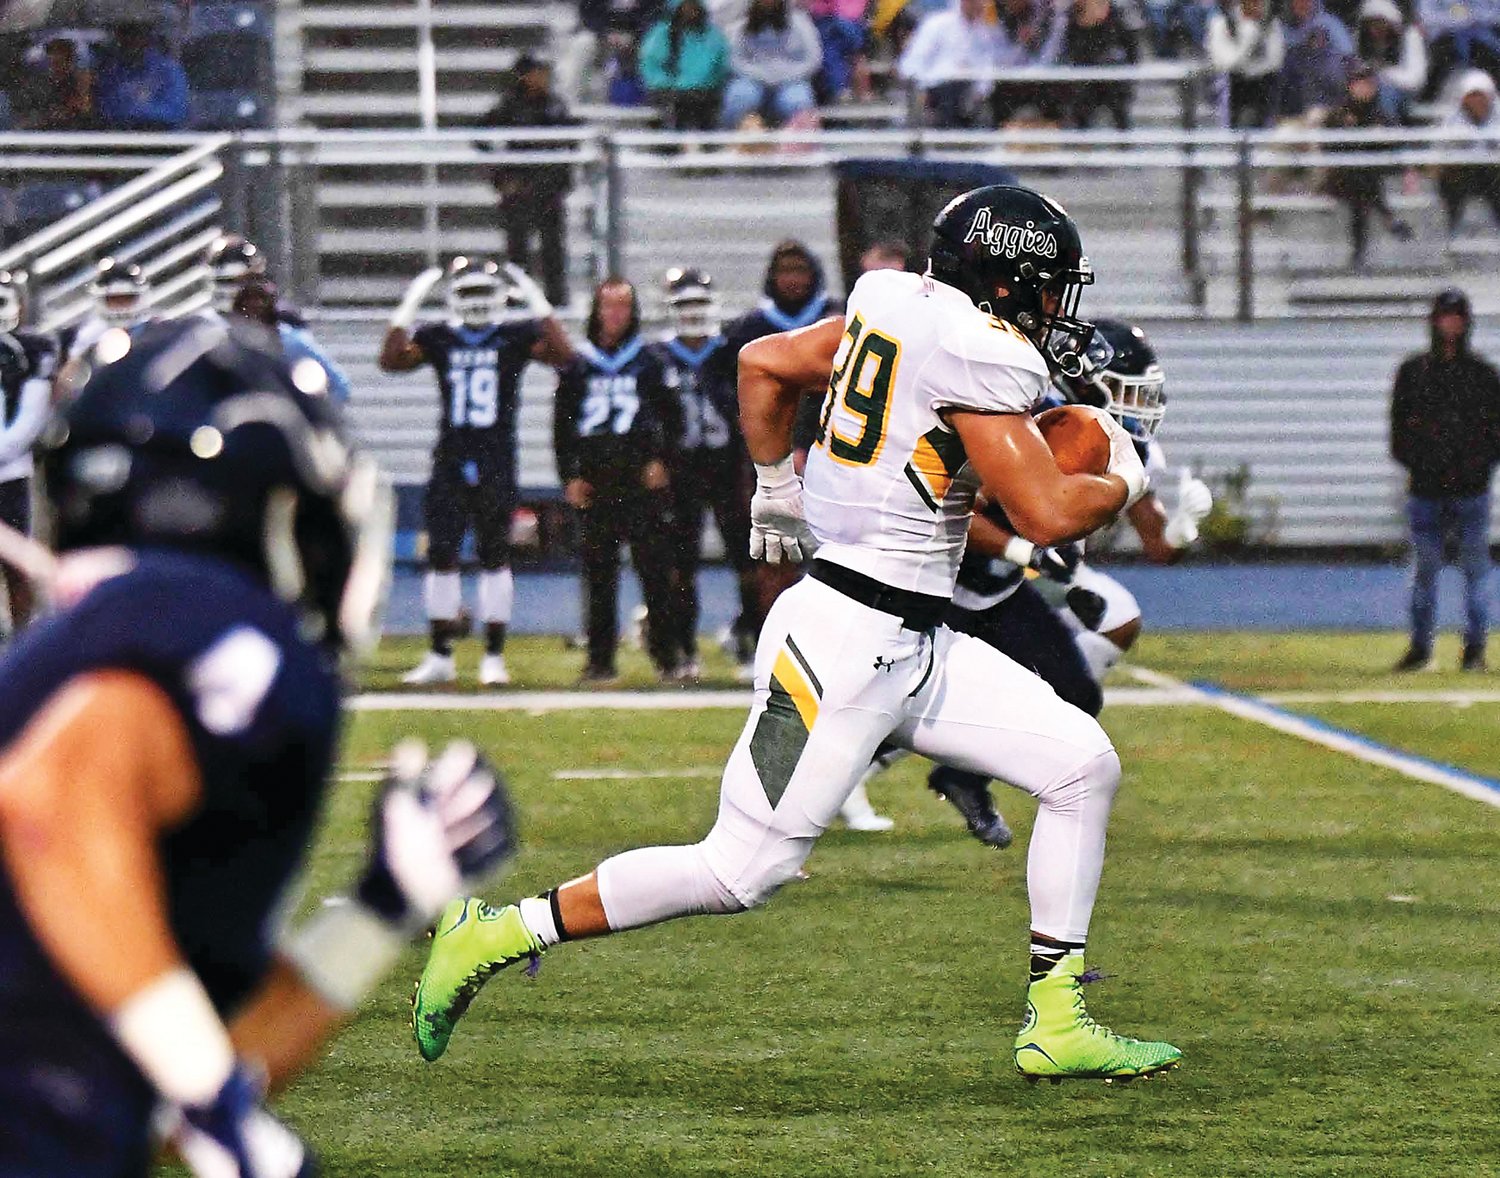 Delaware Valley University fullback Nate Pauls races past a pair of Kean defenders for a 50-yard, first-quarter touchdown reception Friday night in the Aggies’ 37-7 season-opening victory. Photograph by Chuck Greco